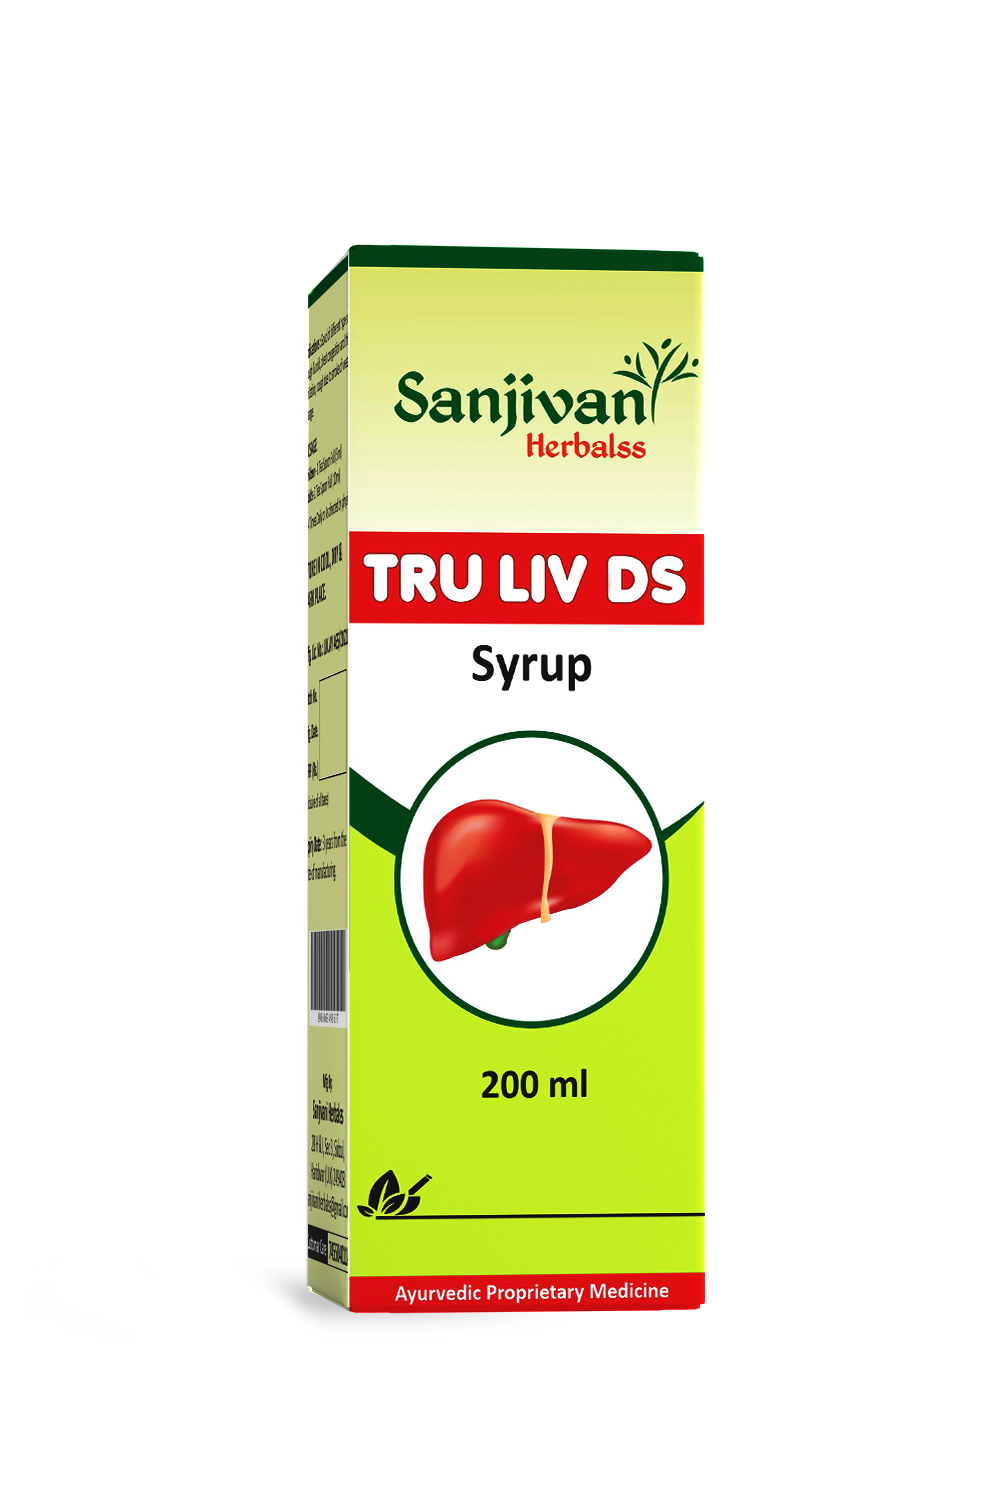 TRULIV DS SYRUP